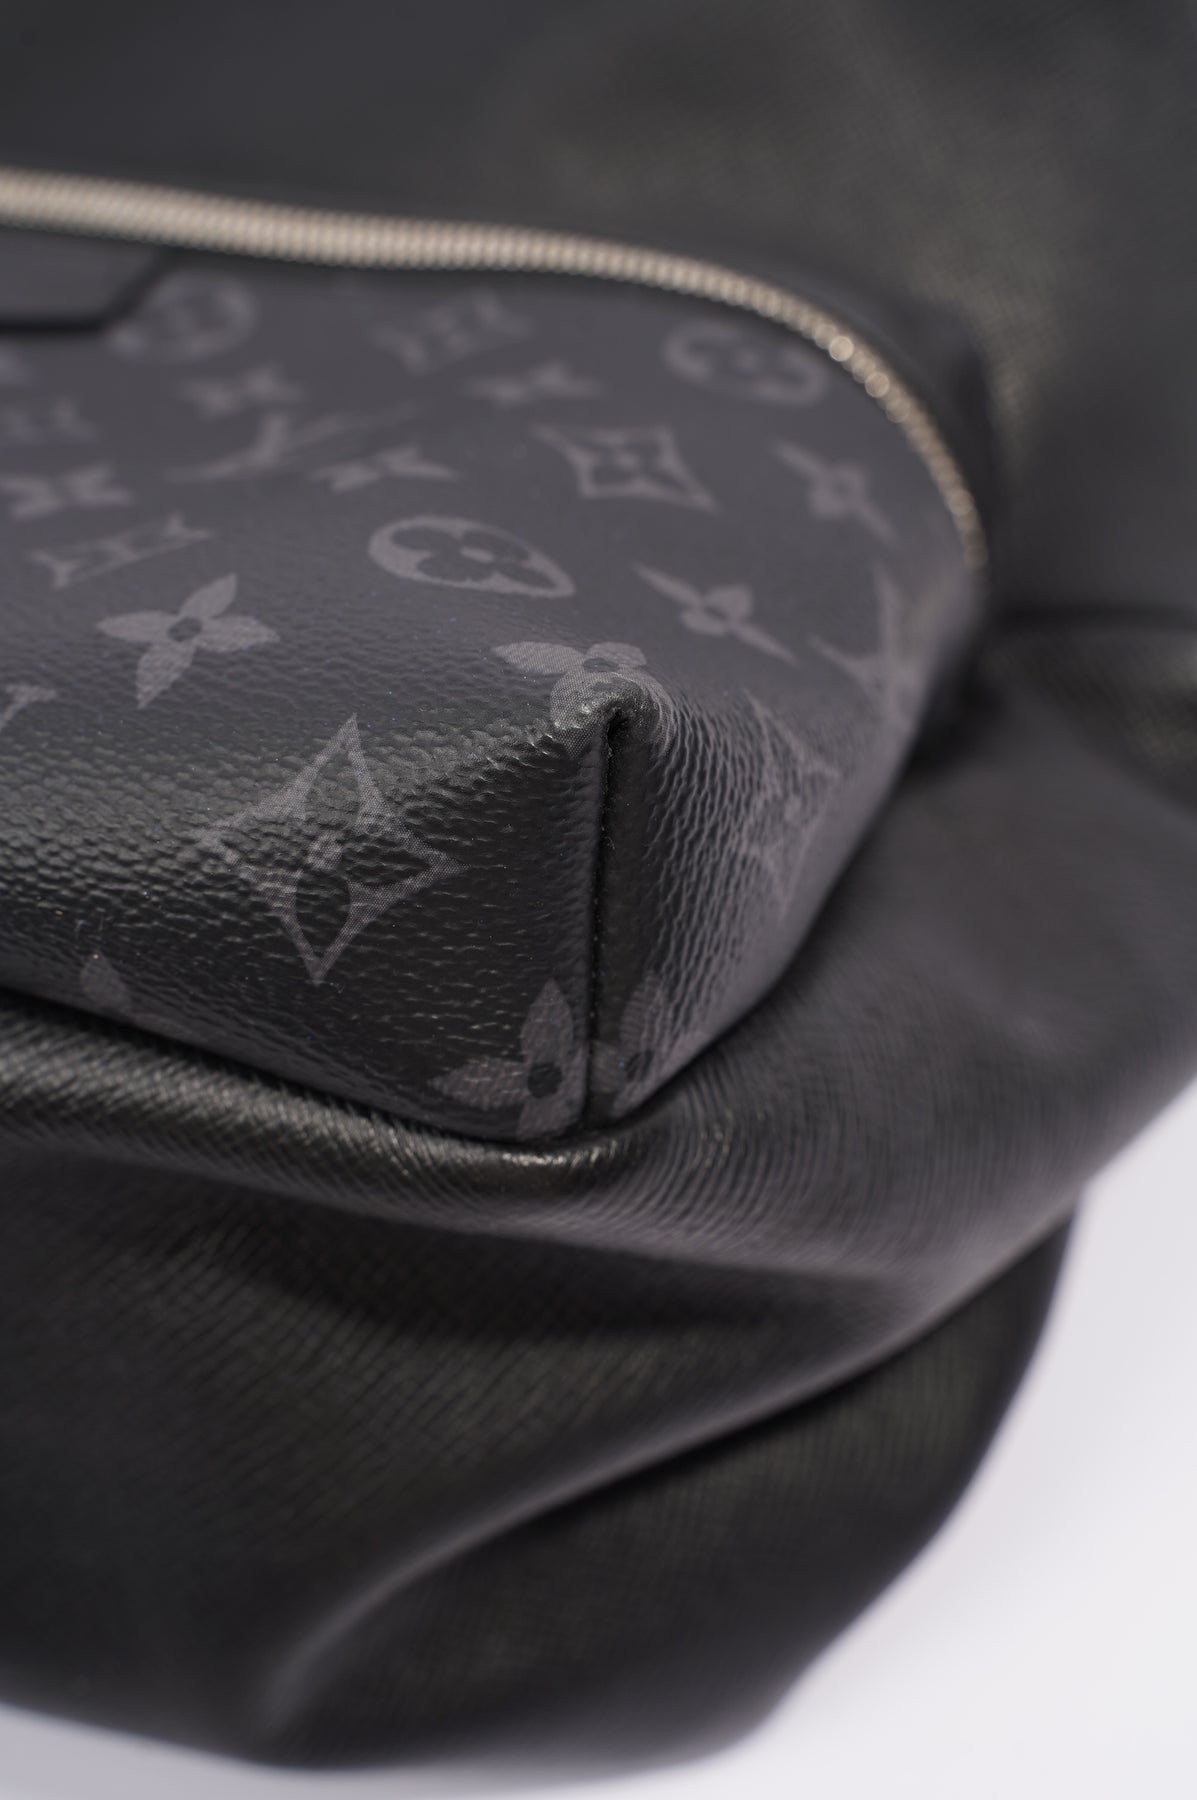 Louis Vuitton Navy Monogram Canvas Discovery Backpack